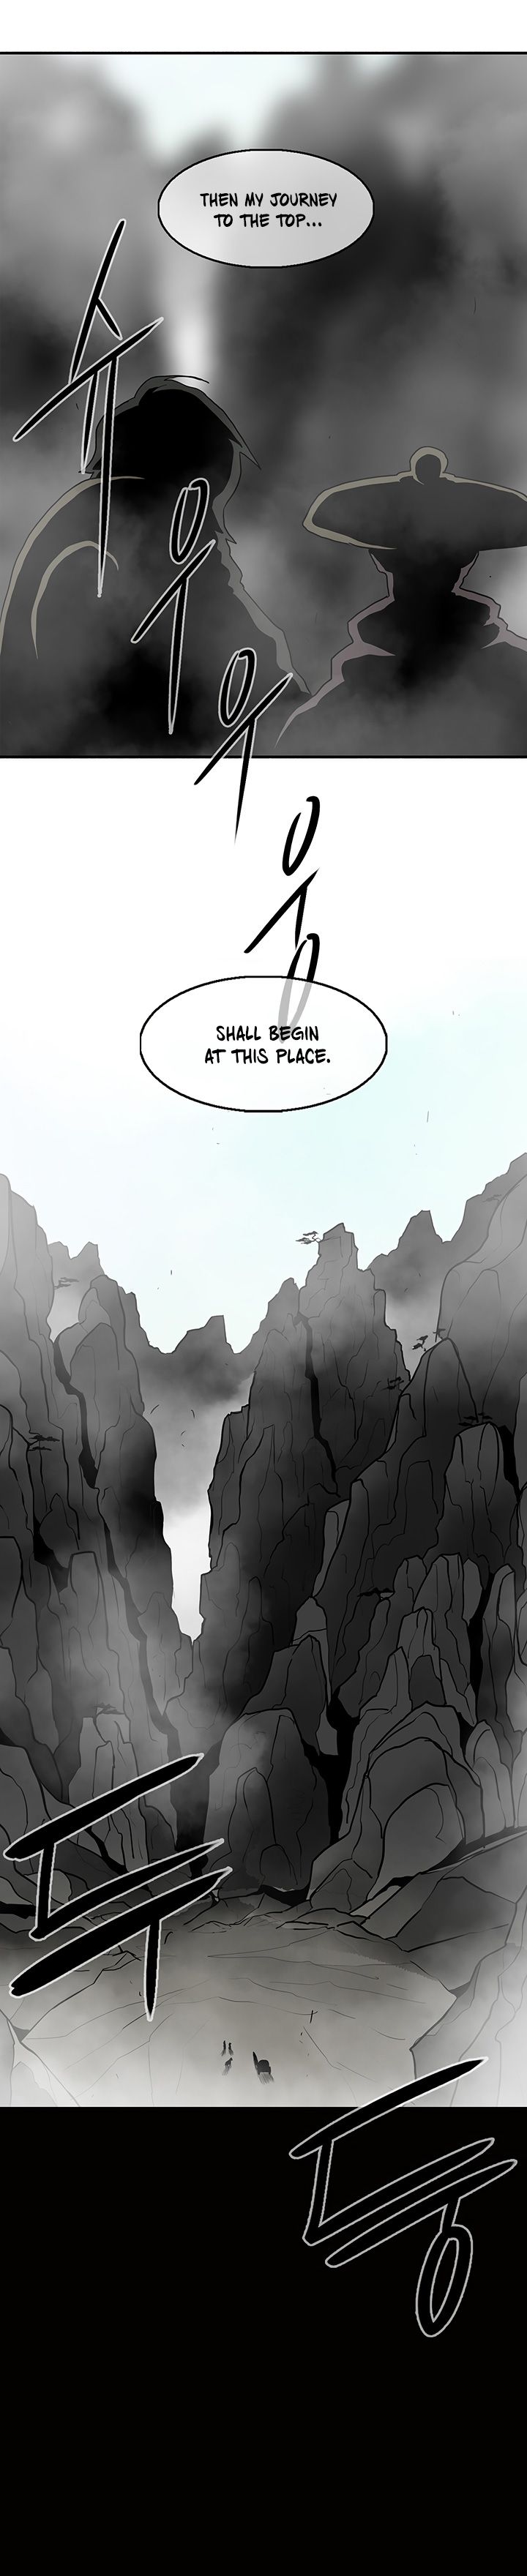 Legend of the Northern Blade chapter 16 page 26